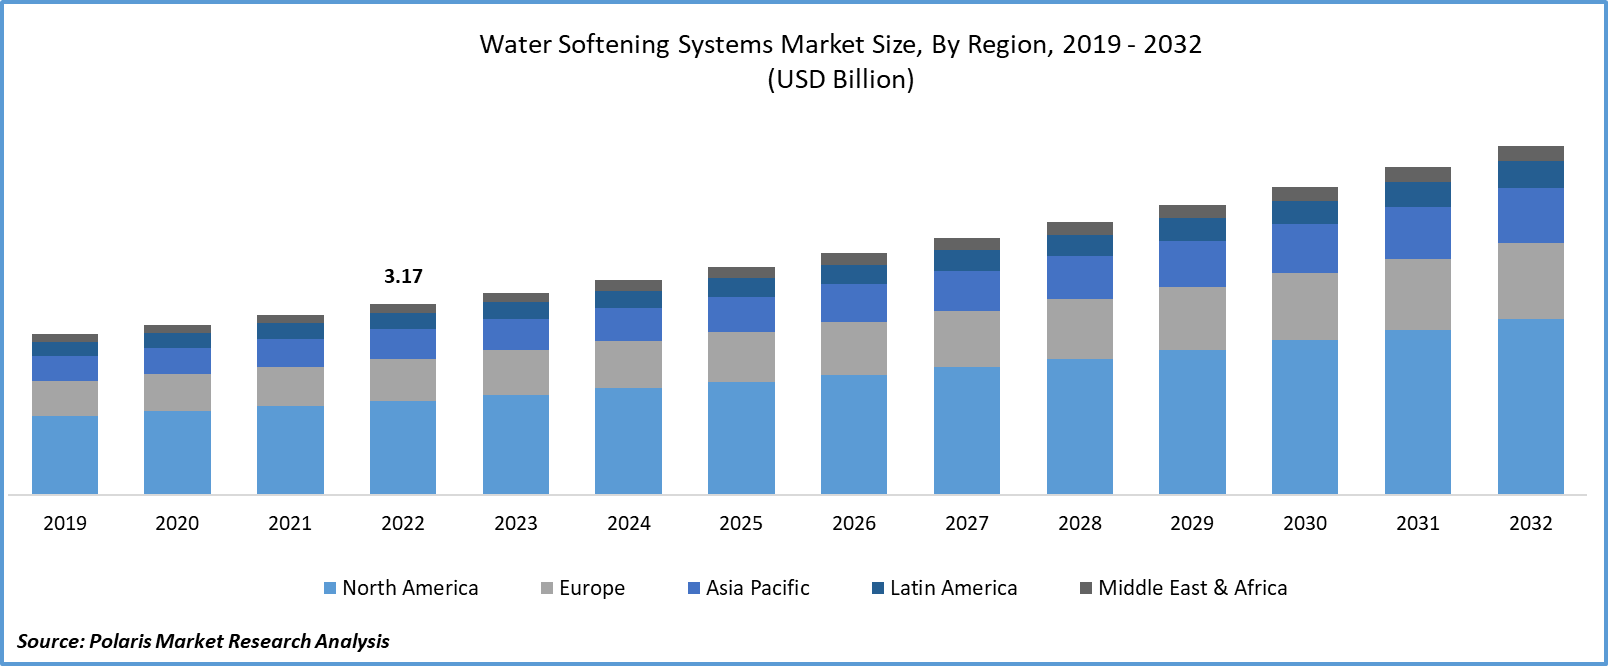 Water Softening Systems Market Size